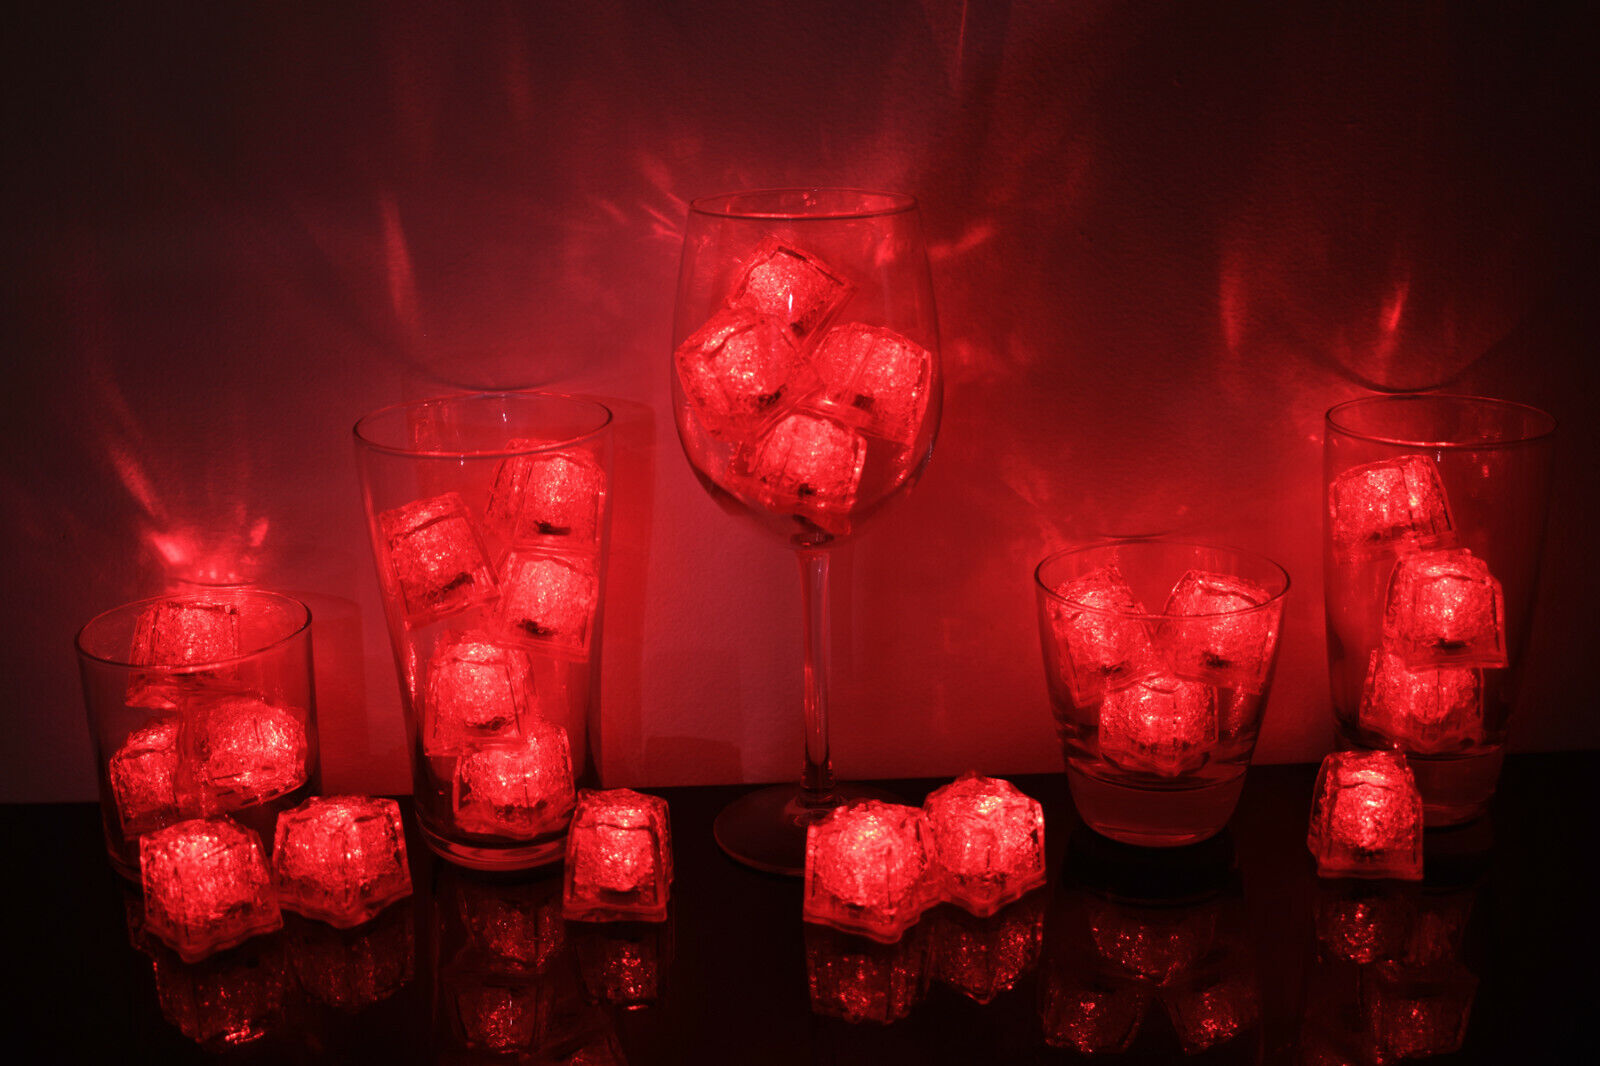 Set of 24 Litecubes Brand Jewel Color Tinted Ruby Red Light up LED Ice Cubes